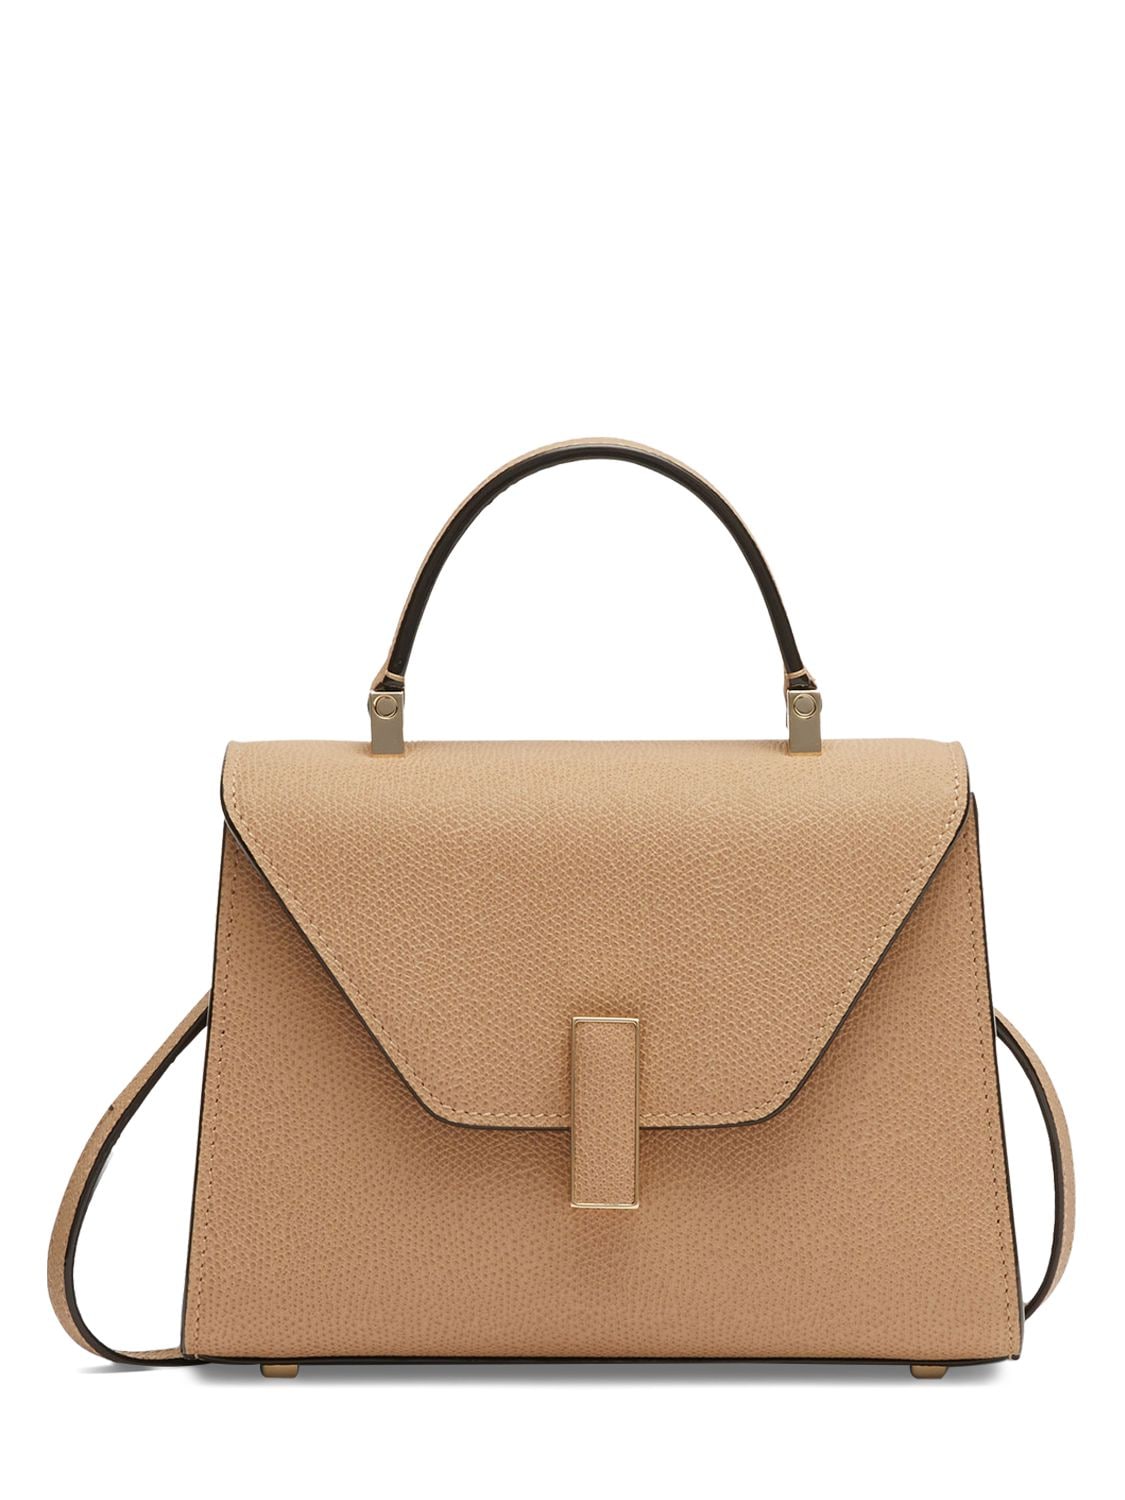 Valextra Micro Iside Grain Leather Top Handle Bag In Beige Cachemire